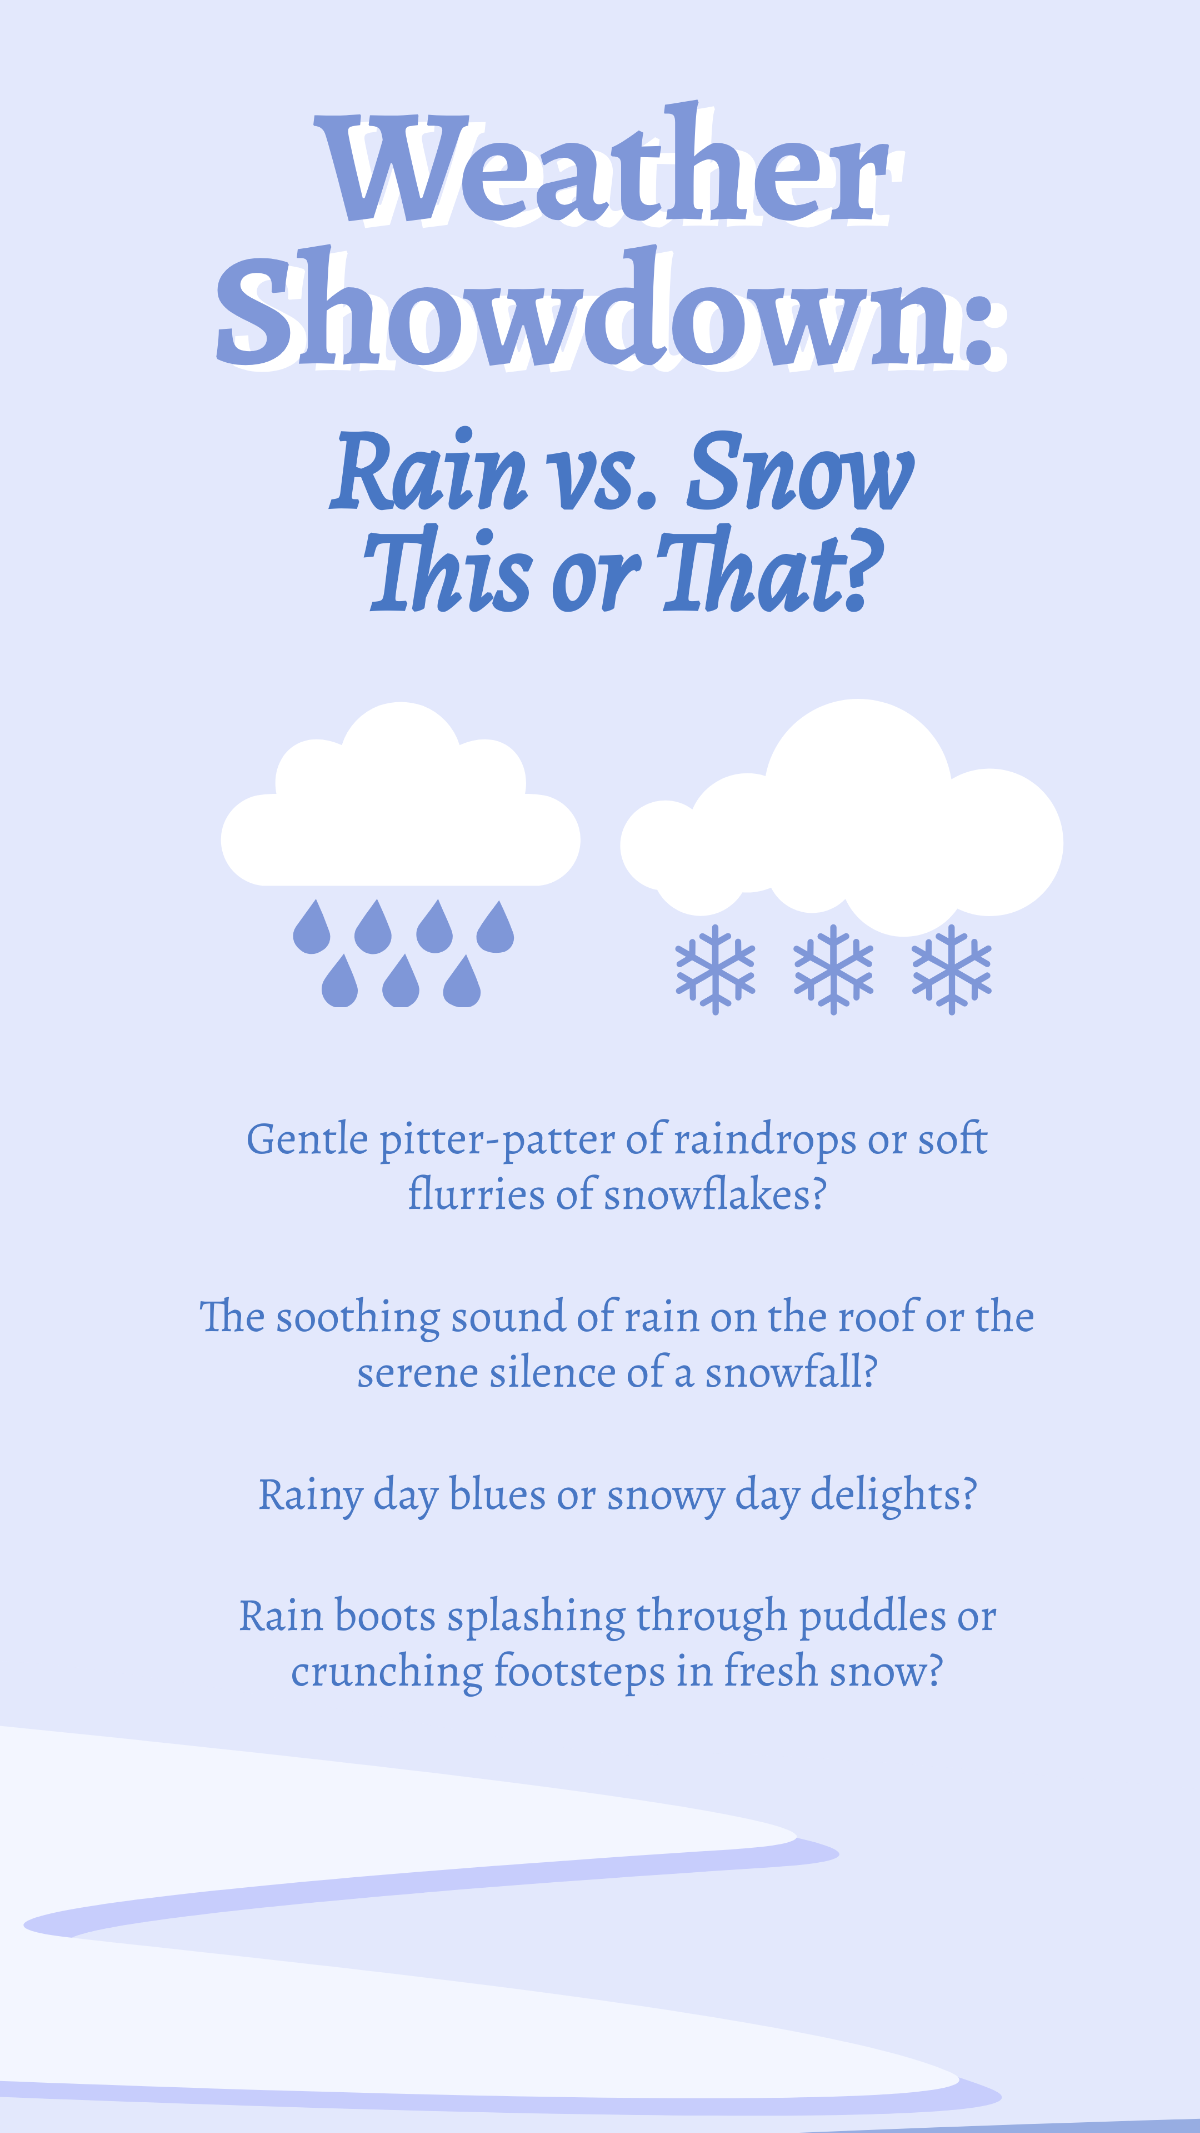 Rain or Snow This or That Story Template